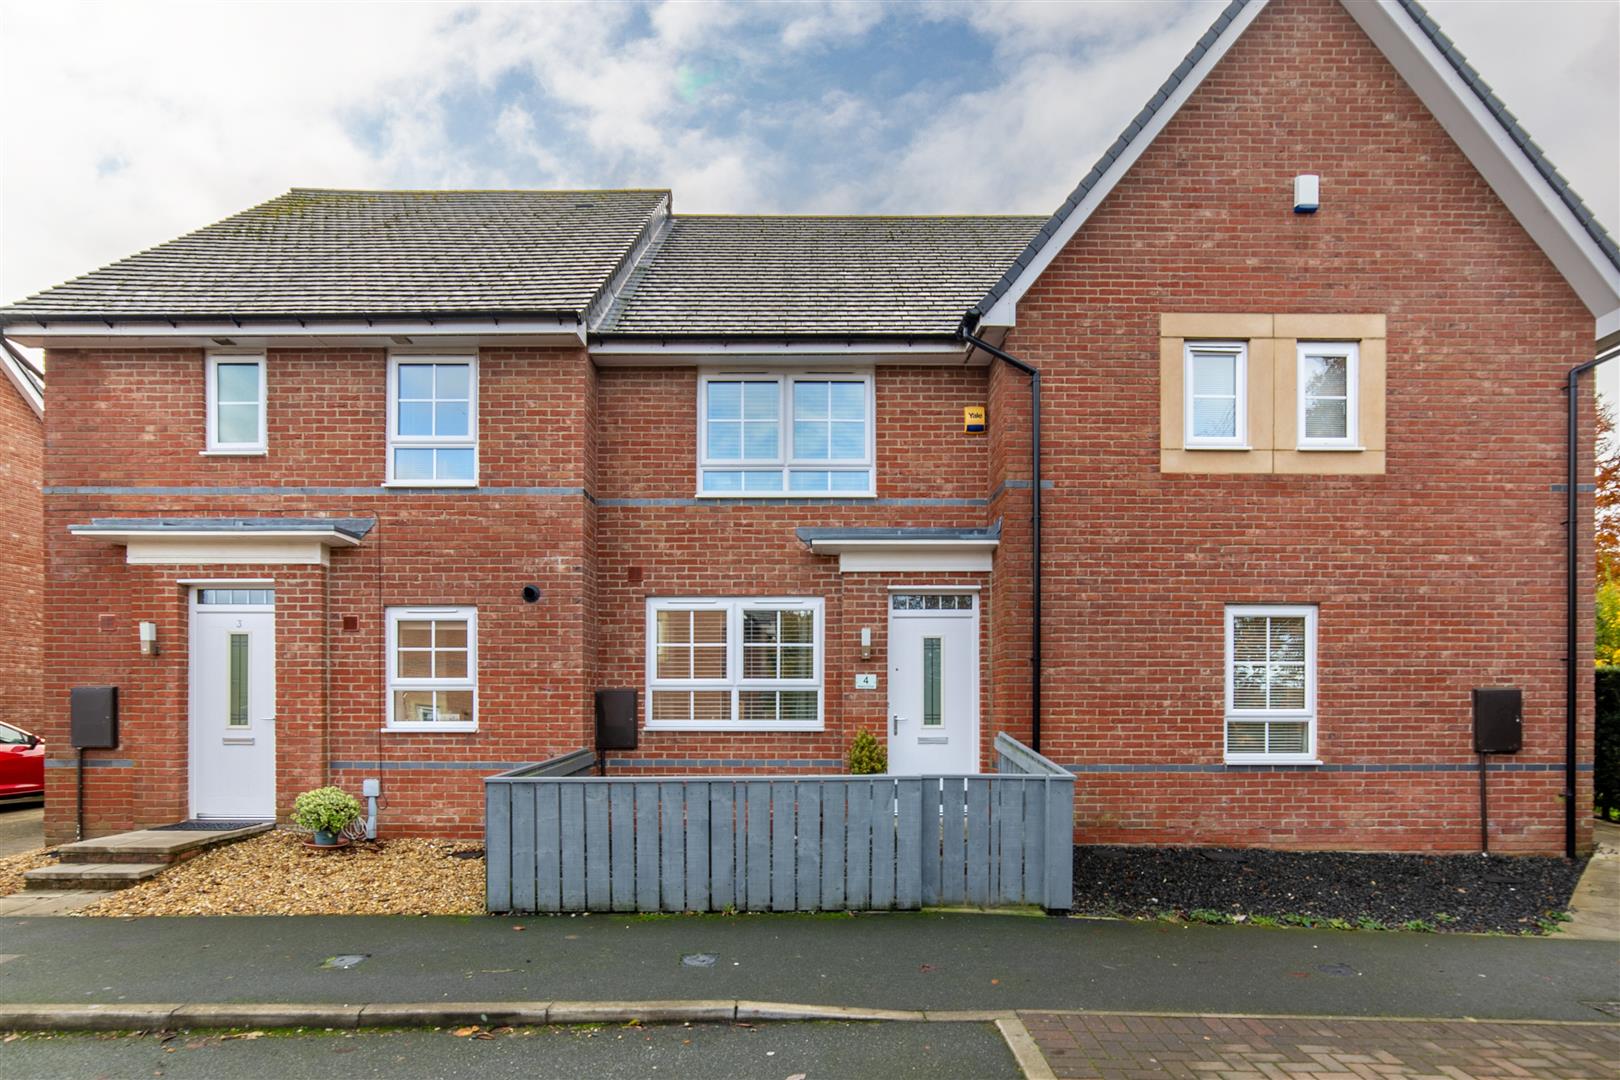 2 bed terraced house for sale in Madron Close, Kenton, NE3 